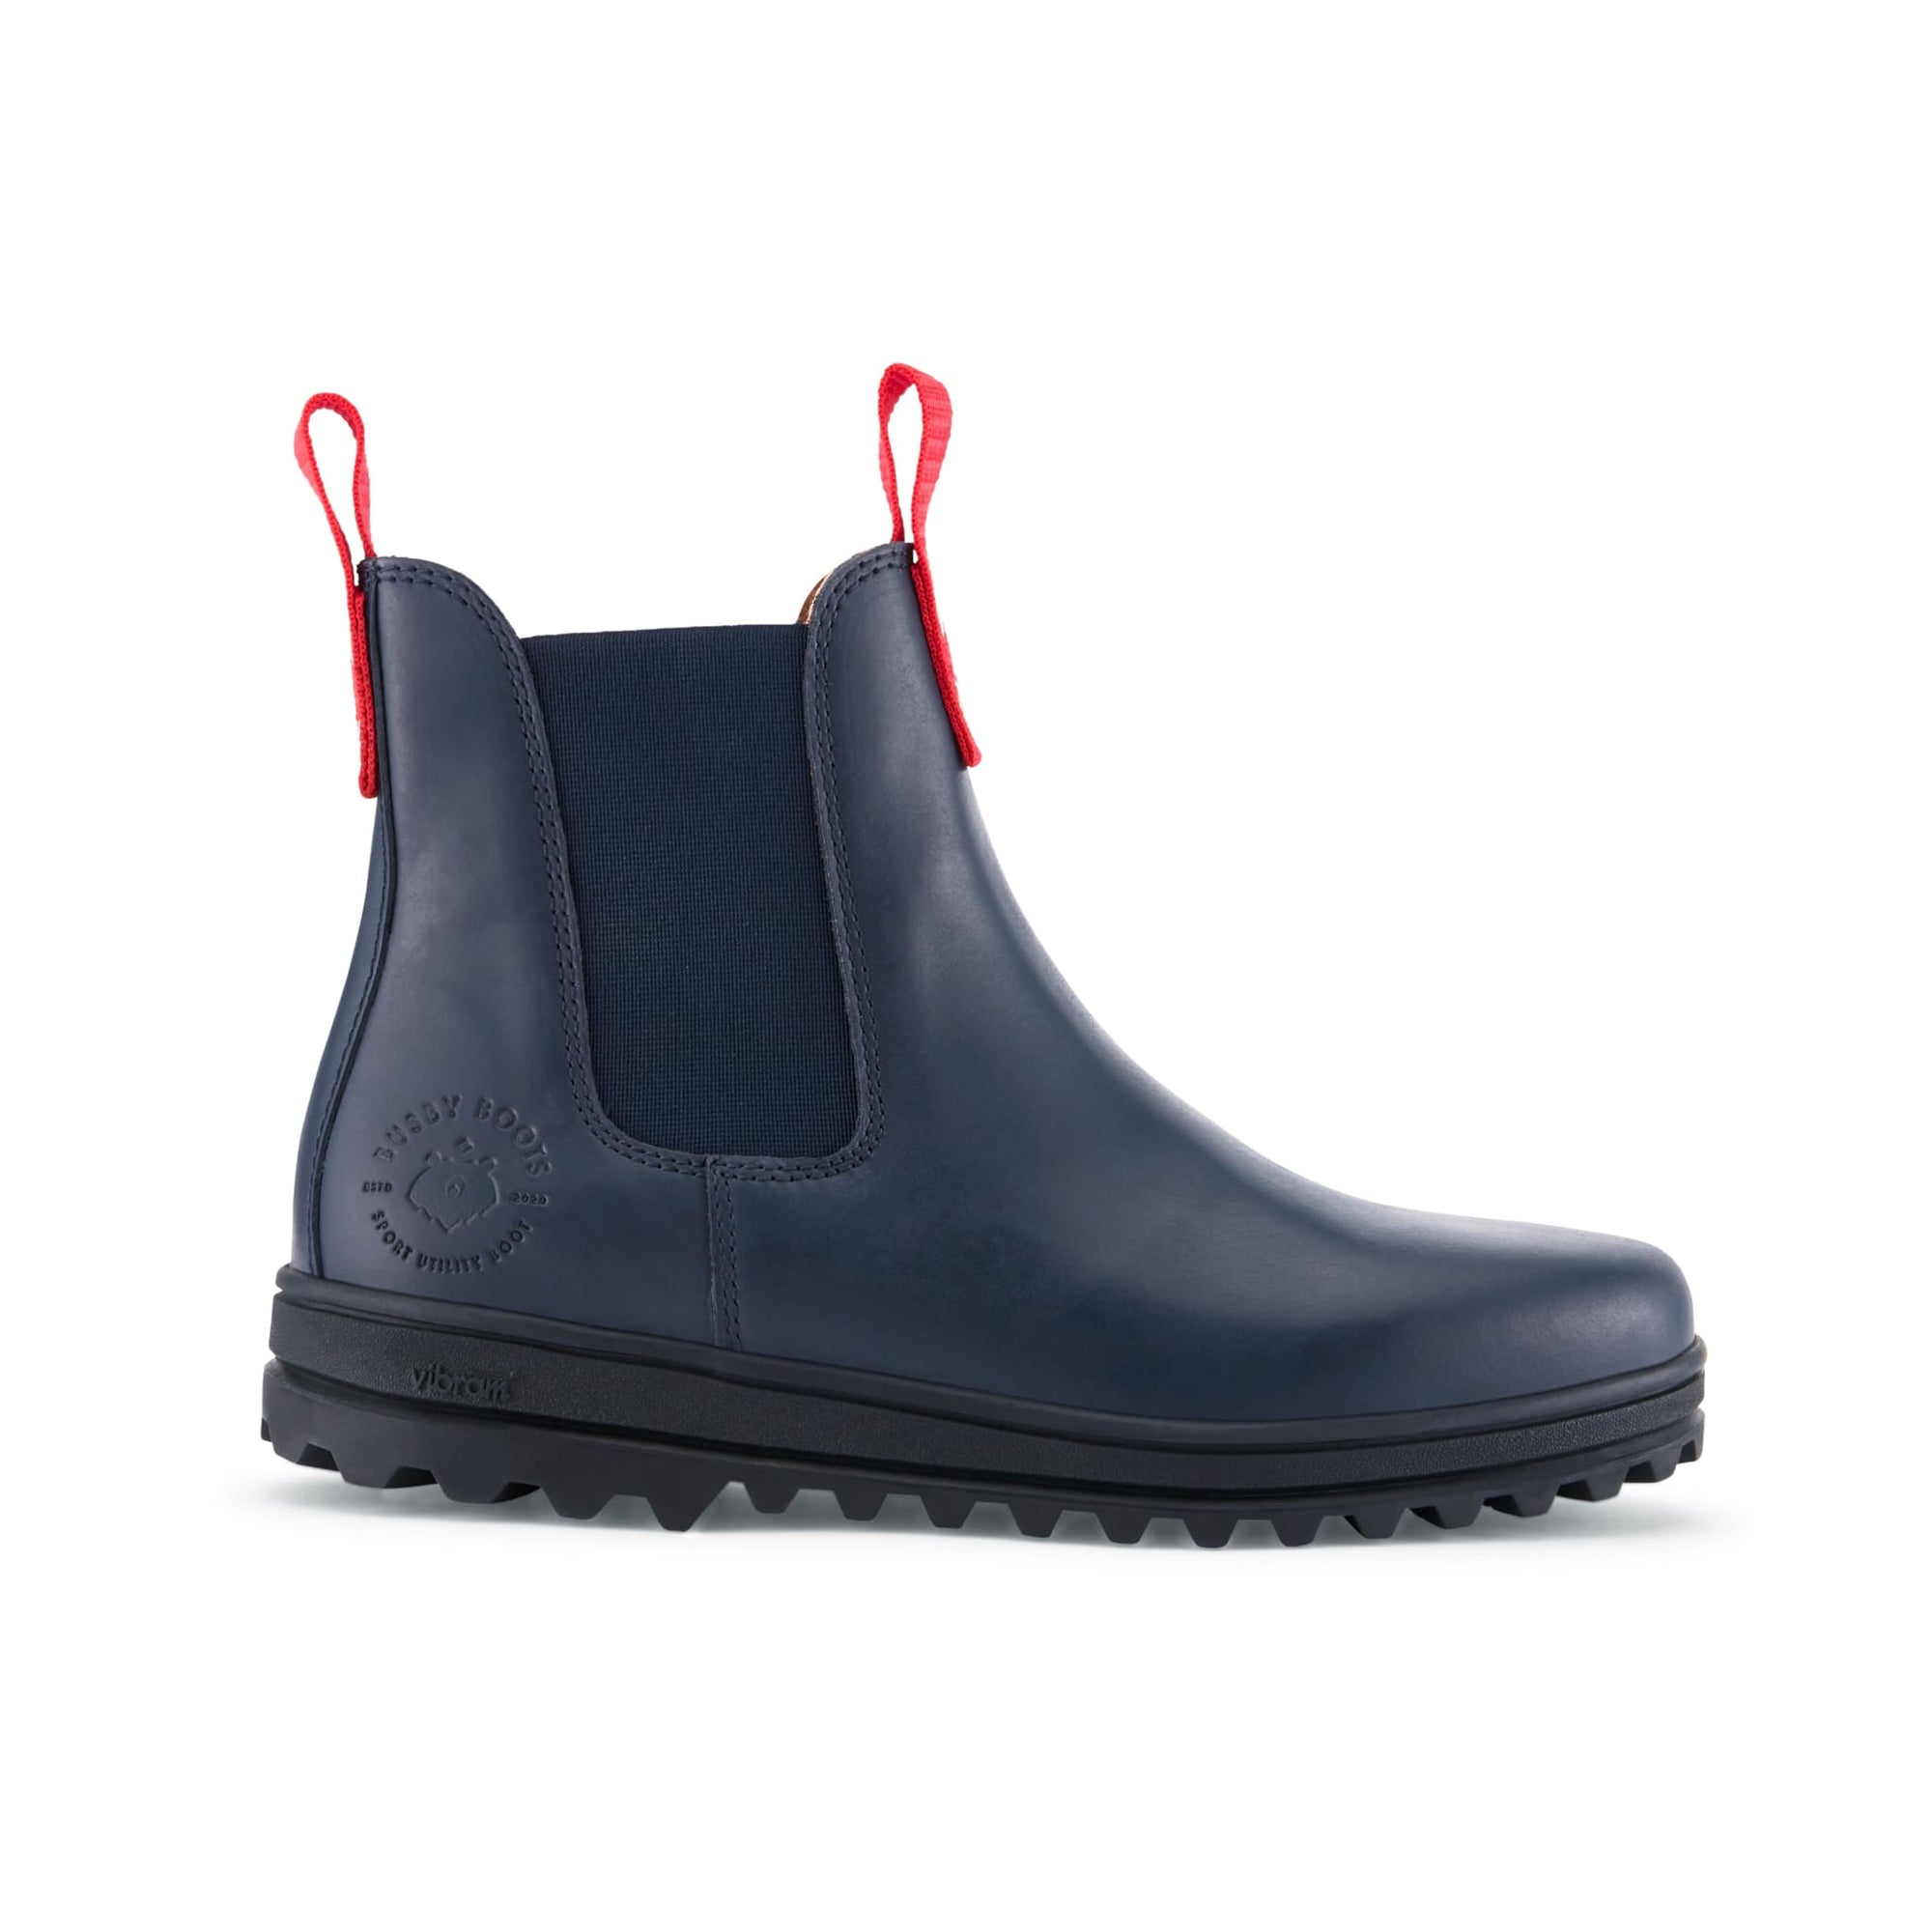 Busby Women's Winter Chelsea Boot, Navy Blue Leather